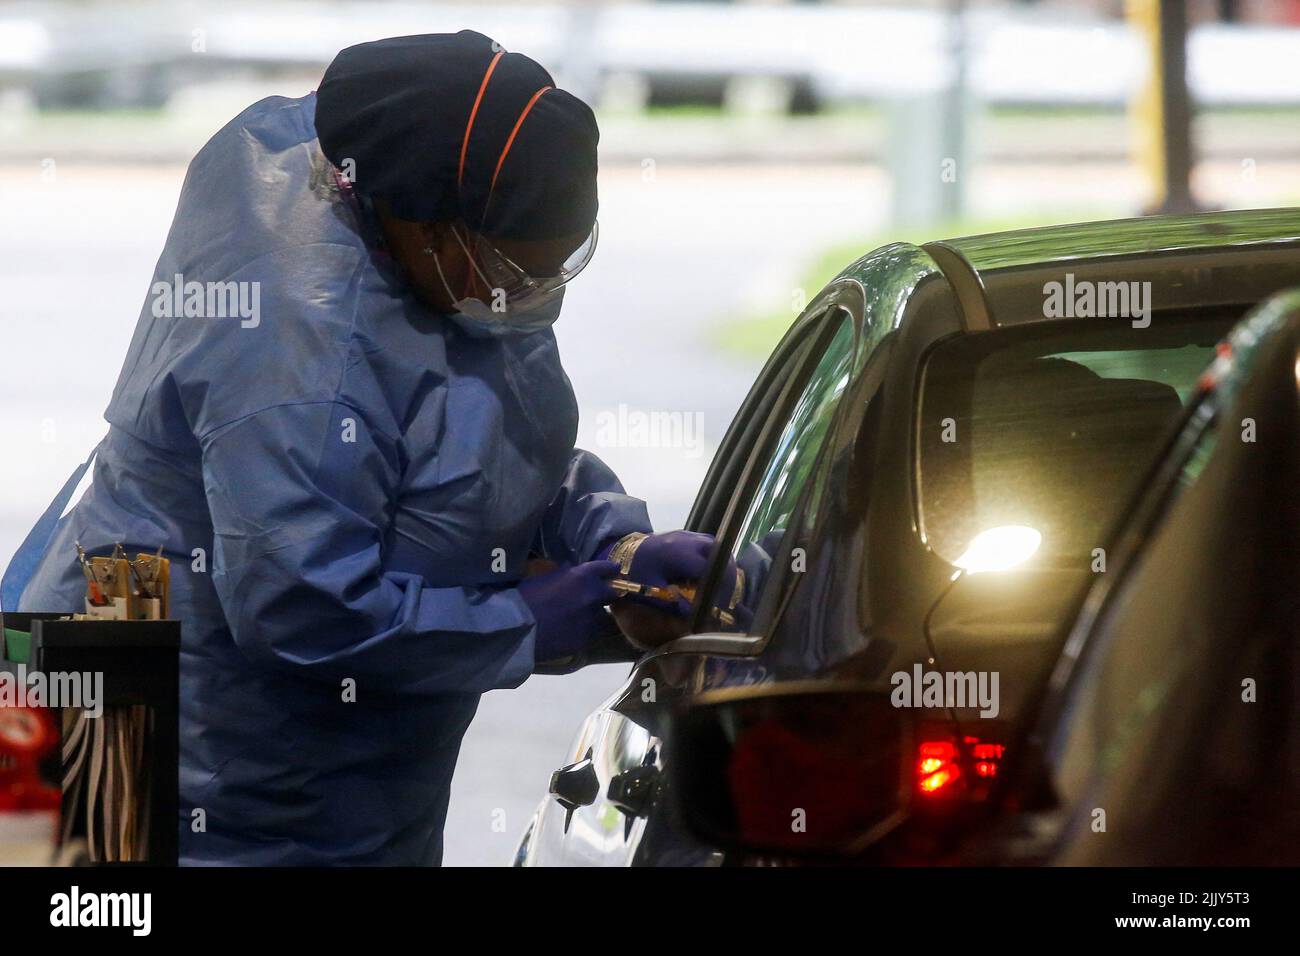 A staff member of the Westchester Medical Center applies a monkeypox vaccine to a person in a drive-through monkeypox vaccination point at the Westchester Medical Center in Valhalla, New York, U.S., July 28, 2022. REUTERS/Eduardo Munoz Stock Photo